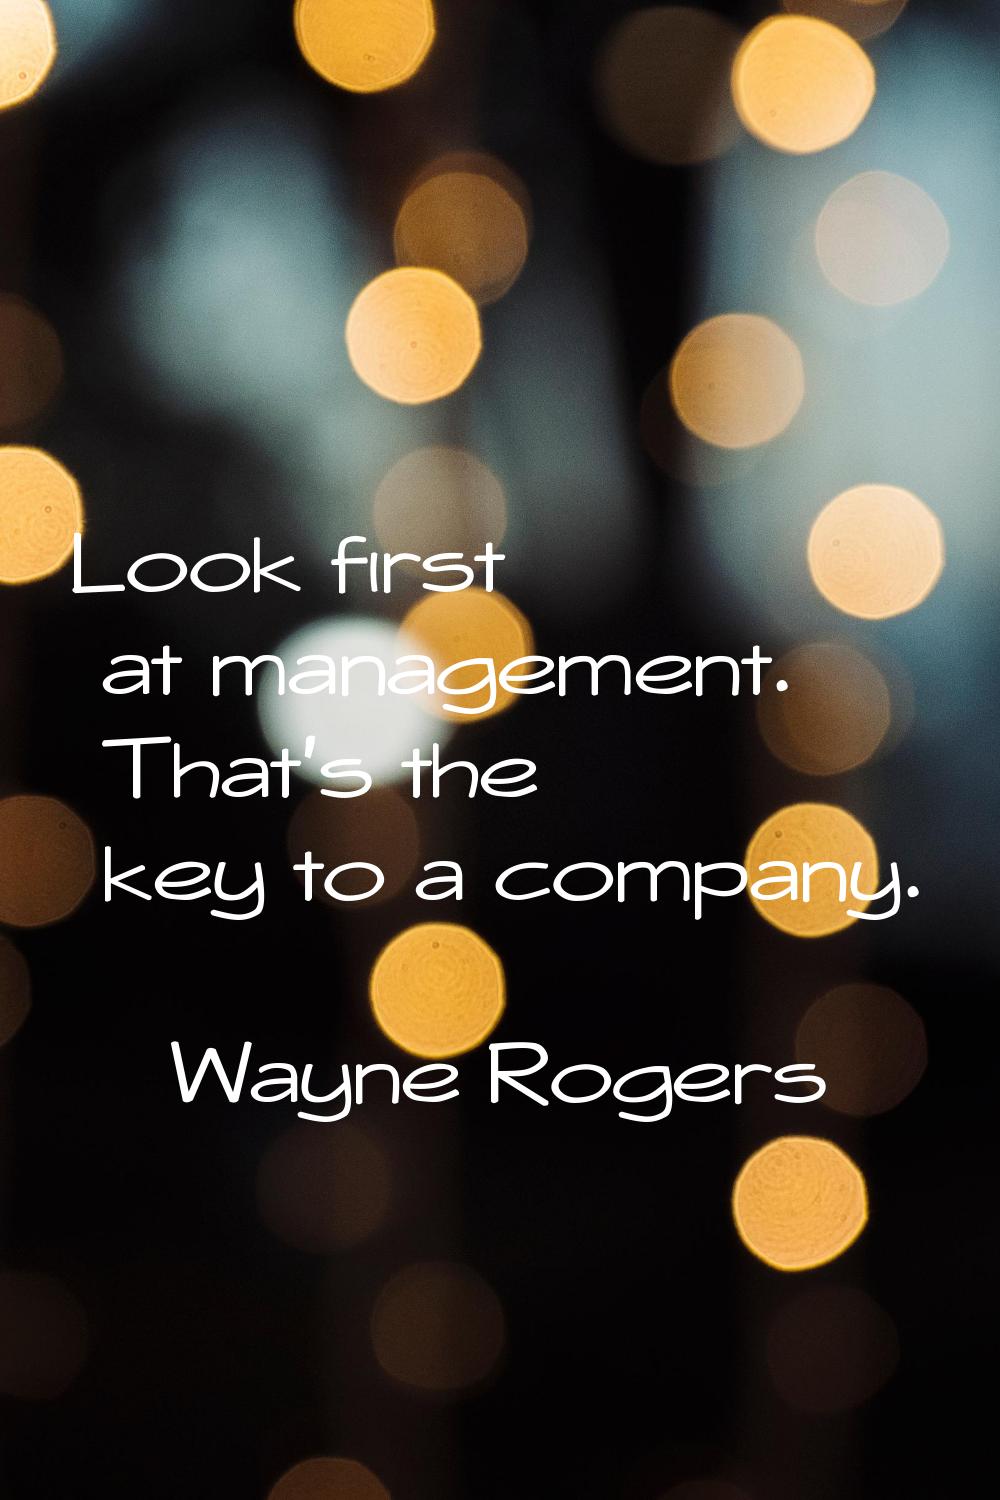 Look first at management. That's the key to a company.